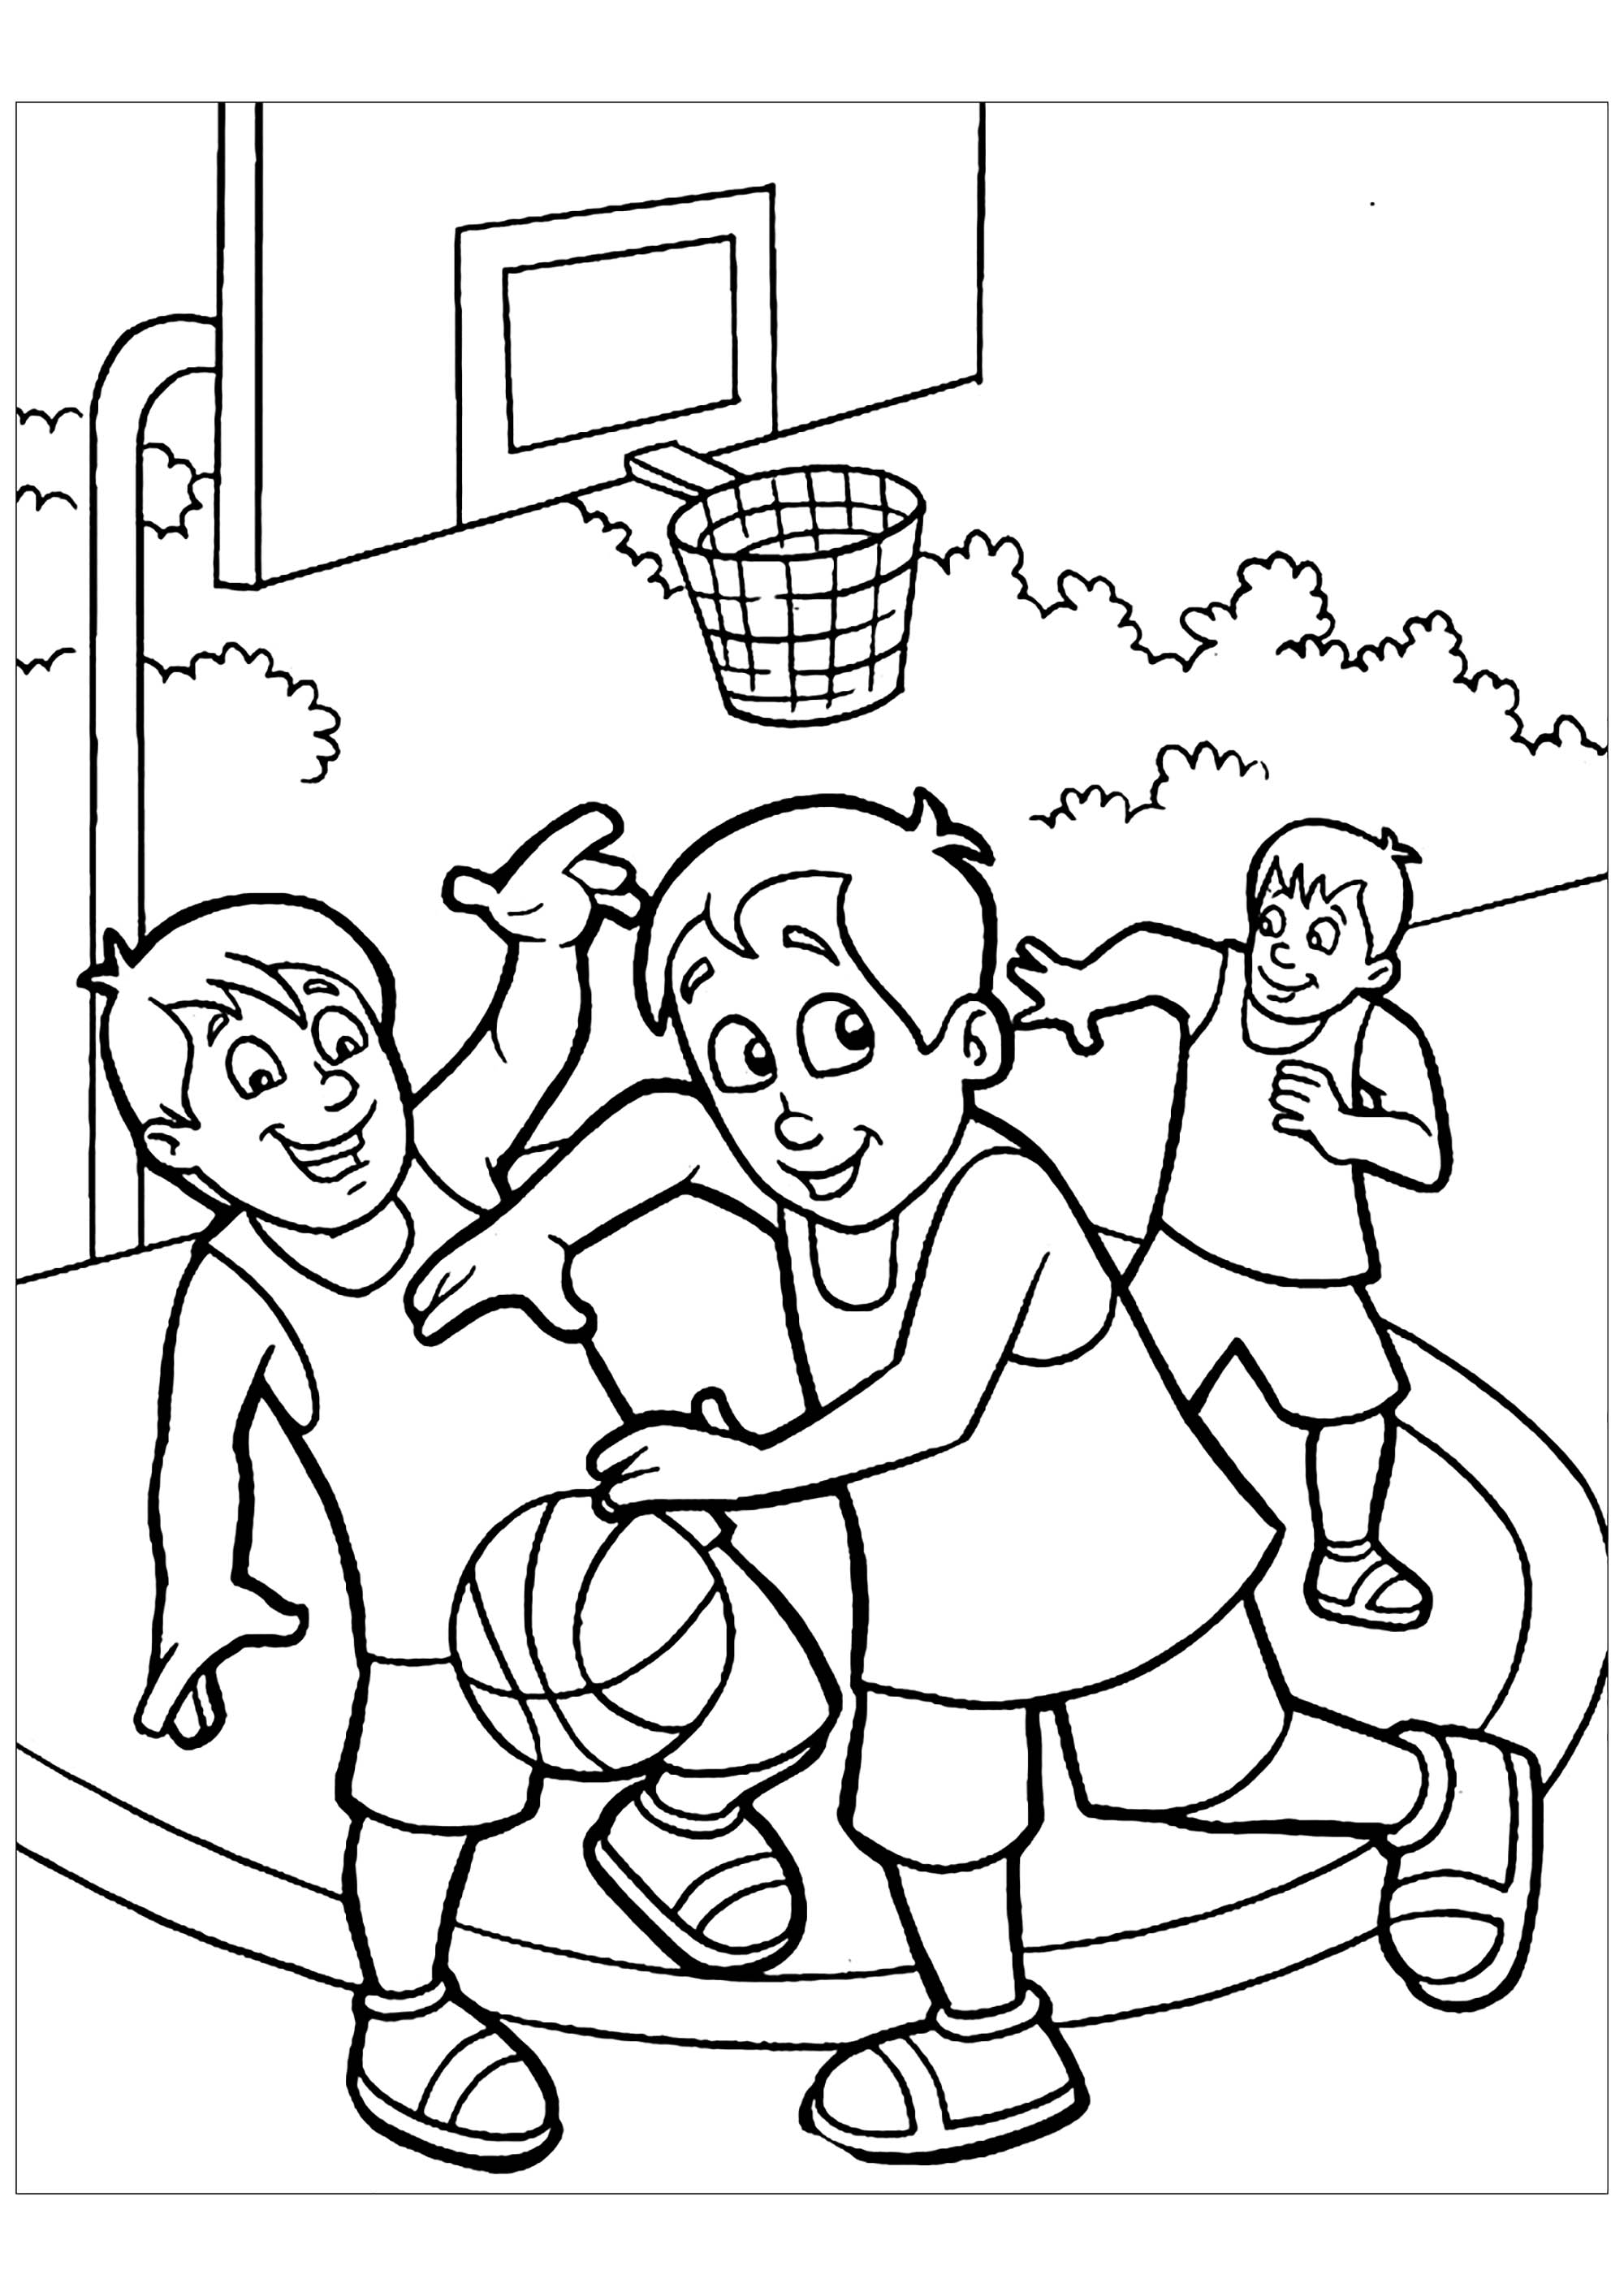 Basketball free to color for kids Basketball Kids Coloring Pages